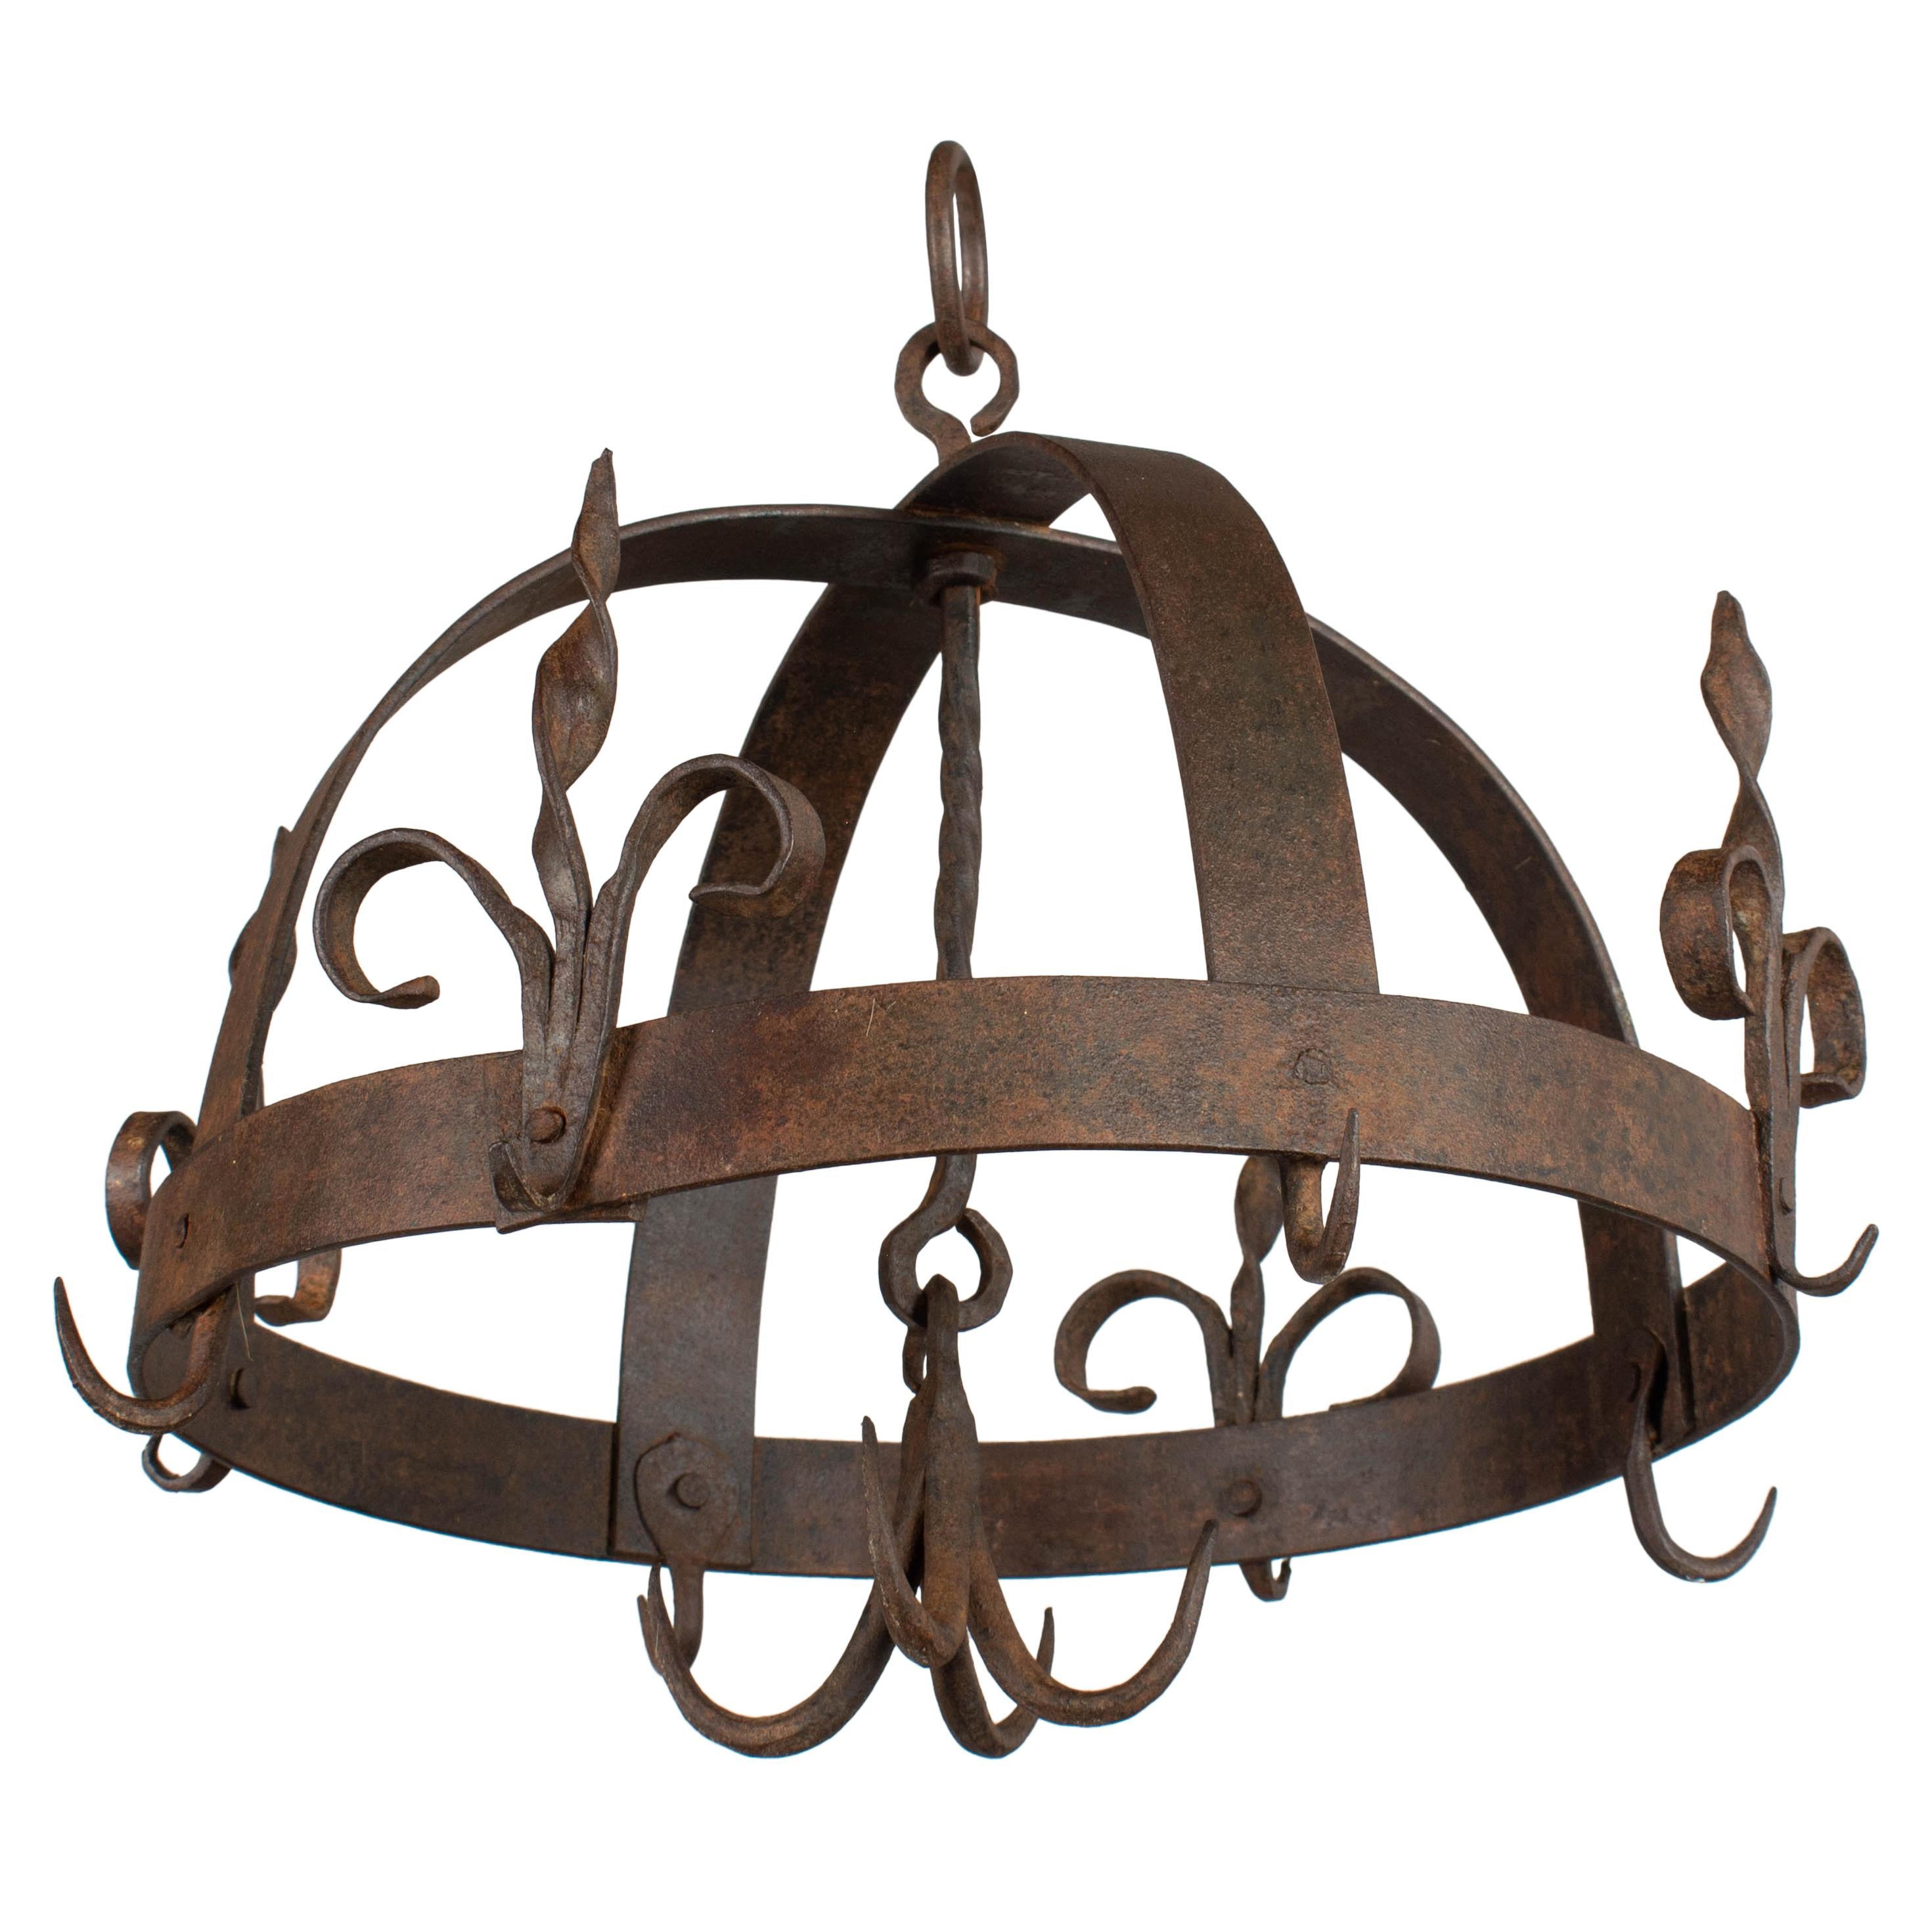 19th Century French Wrought Iron Hanging Pot Rack